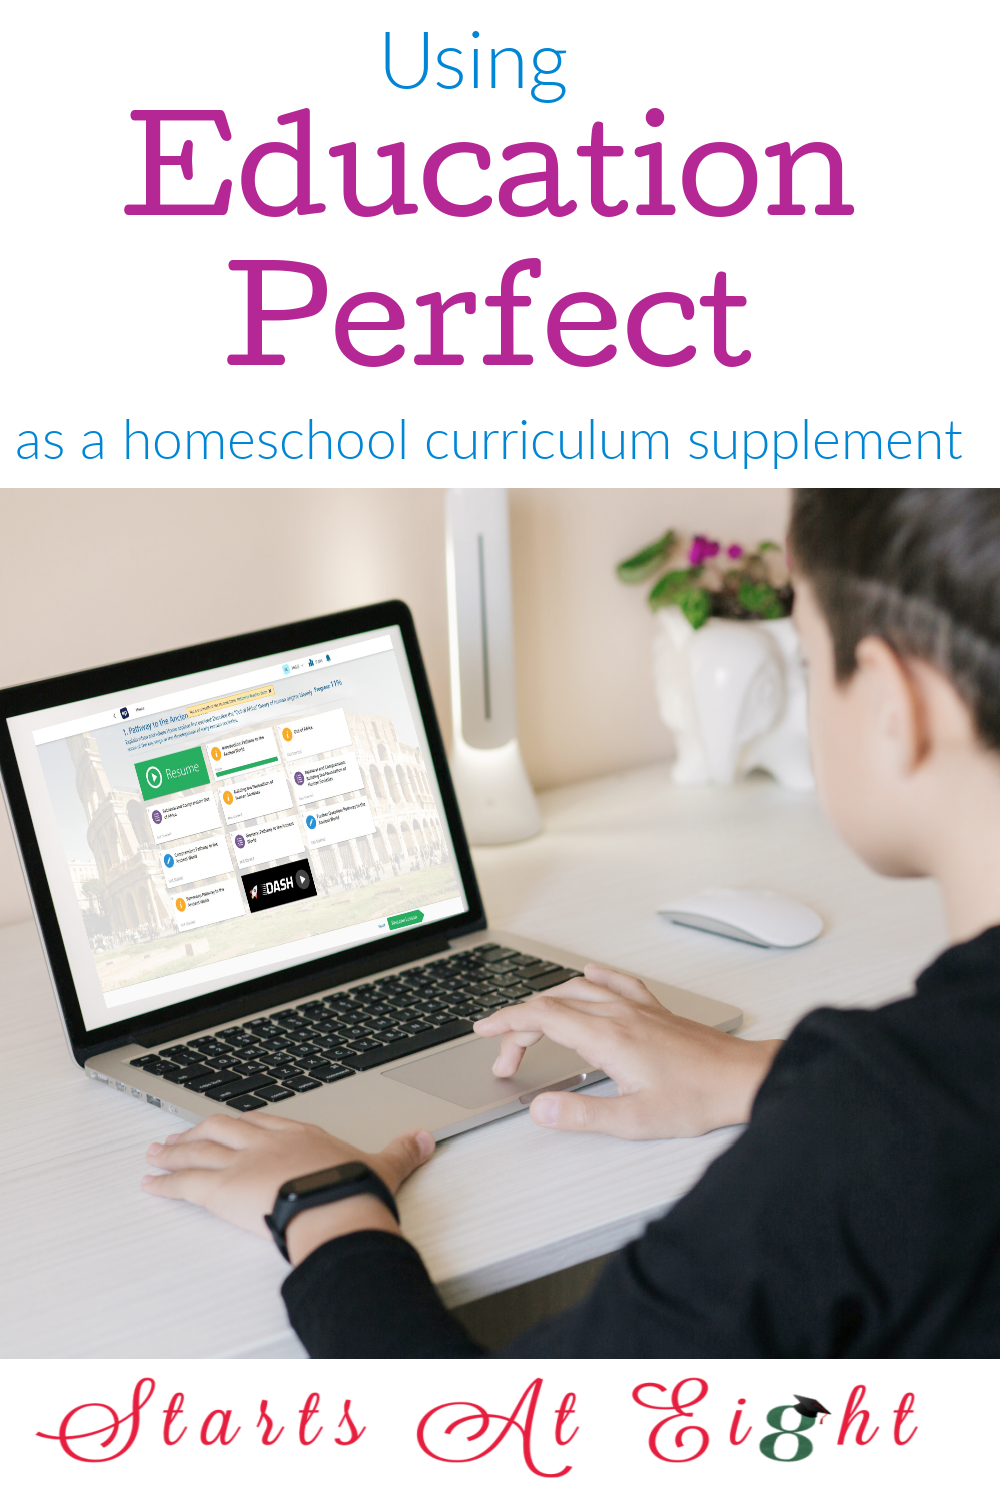 Education Perfect is an online learning platform whose goal is to help you personalize the learning experience for each and every child.